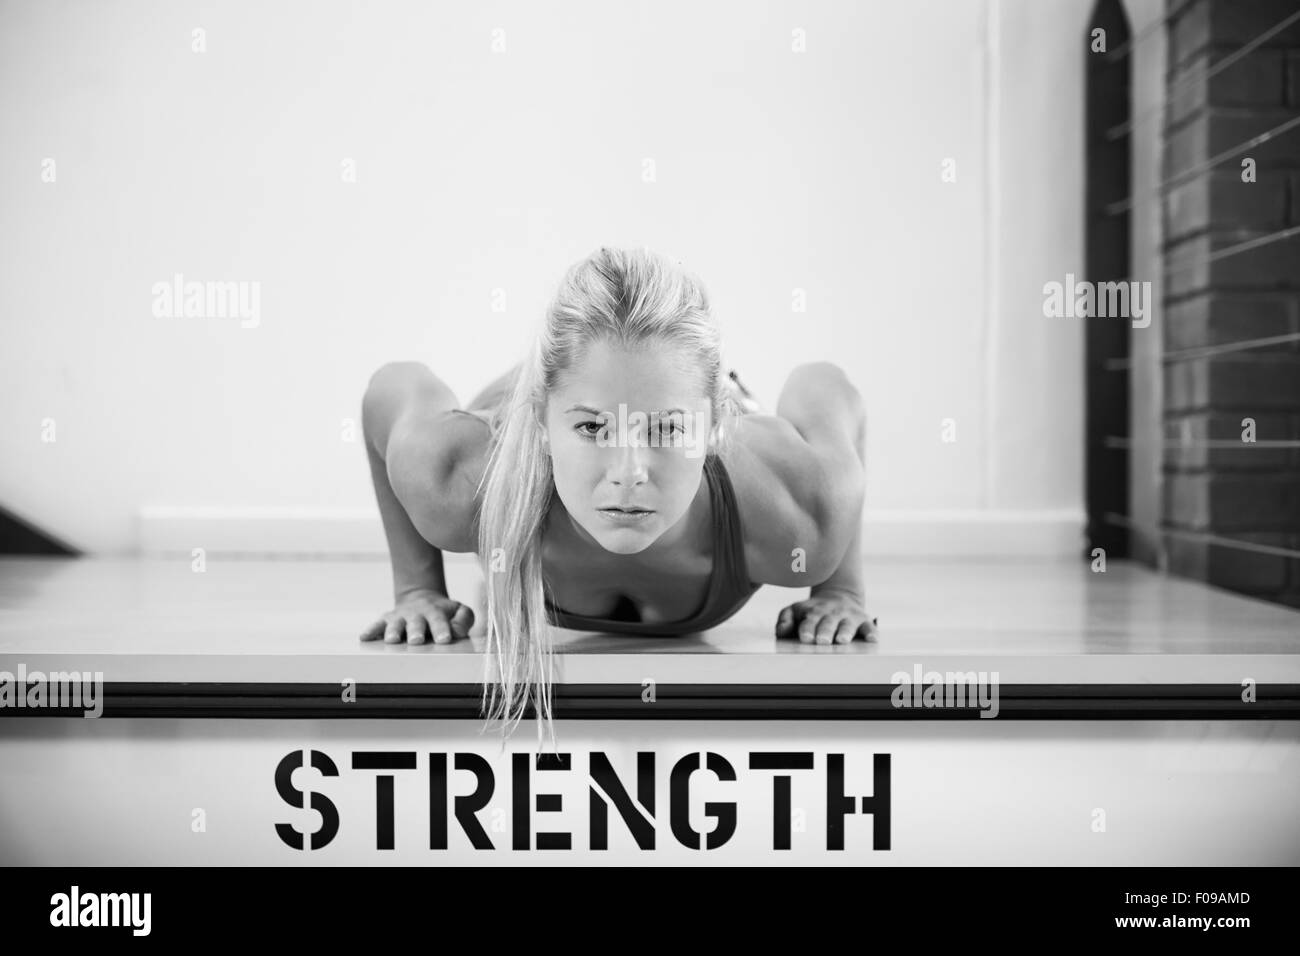 Black And White Shot Of Woman In Gym Doing Press-Ups Stock Photo